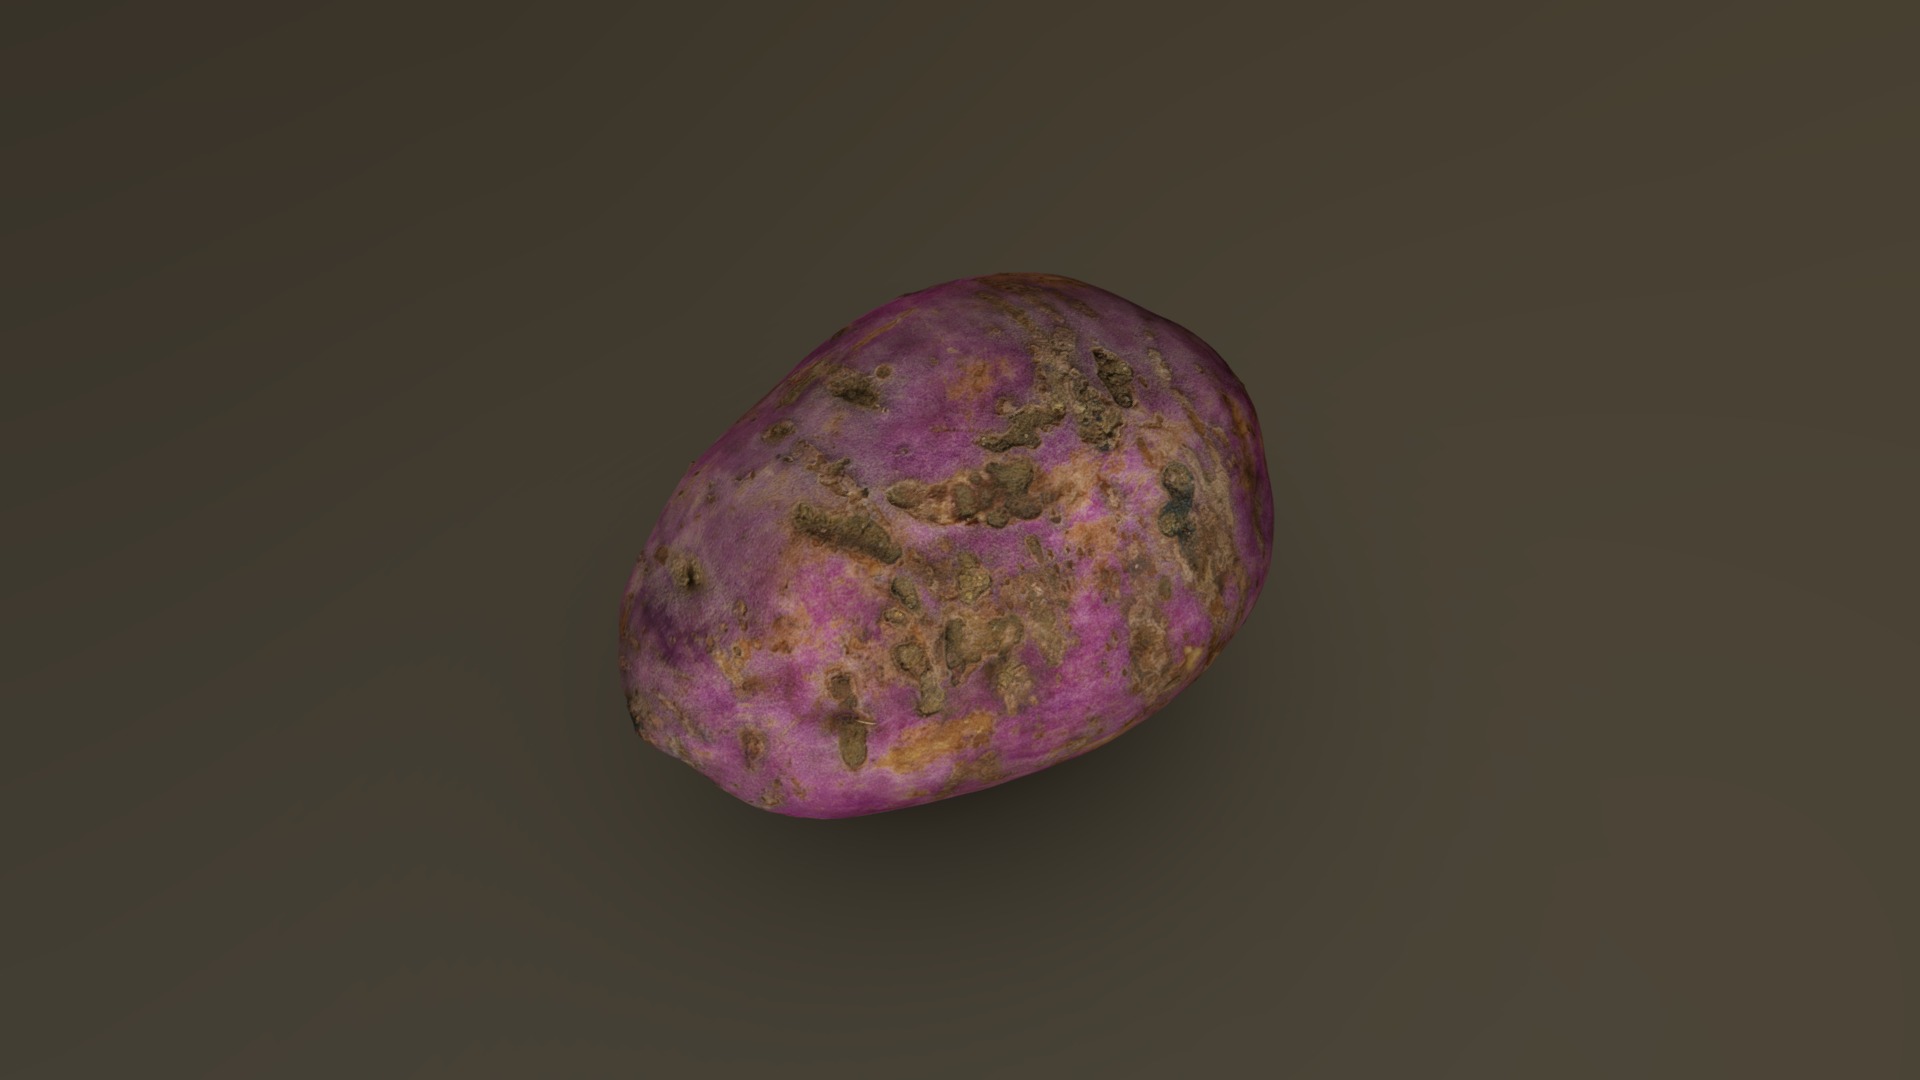 3D model Camote (Sweet Potato) 01 - This is a 3D model of the Camote (Sweet Potato) 01. The 3D model is about a pink and green spherical object.